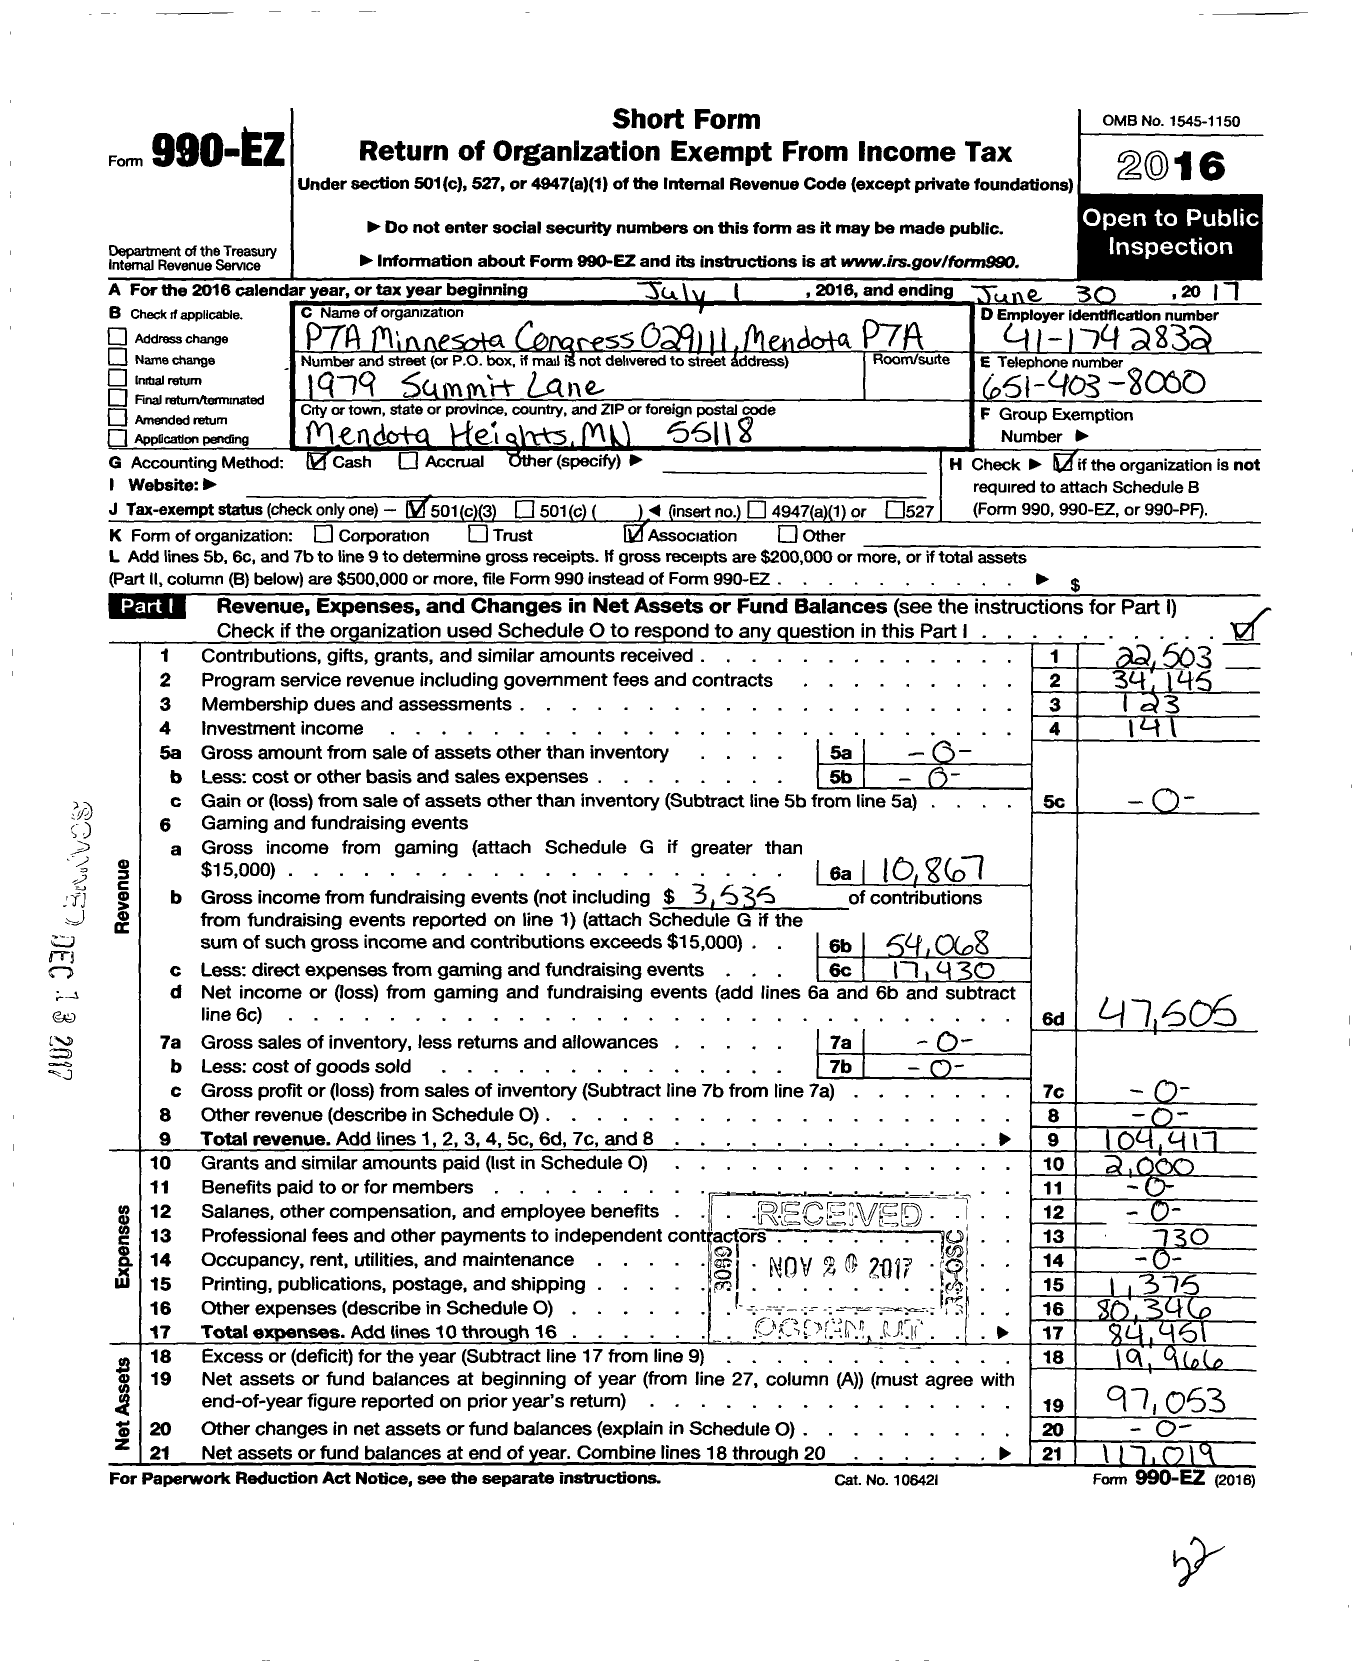 Image of first page of 2016 Form 990EZ for PTA Minnesota Congress 029111 Mendota PTA